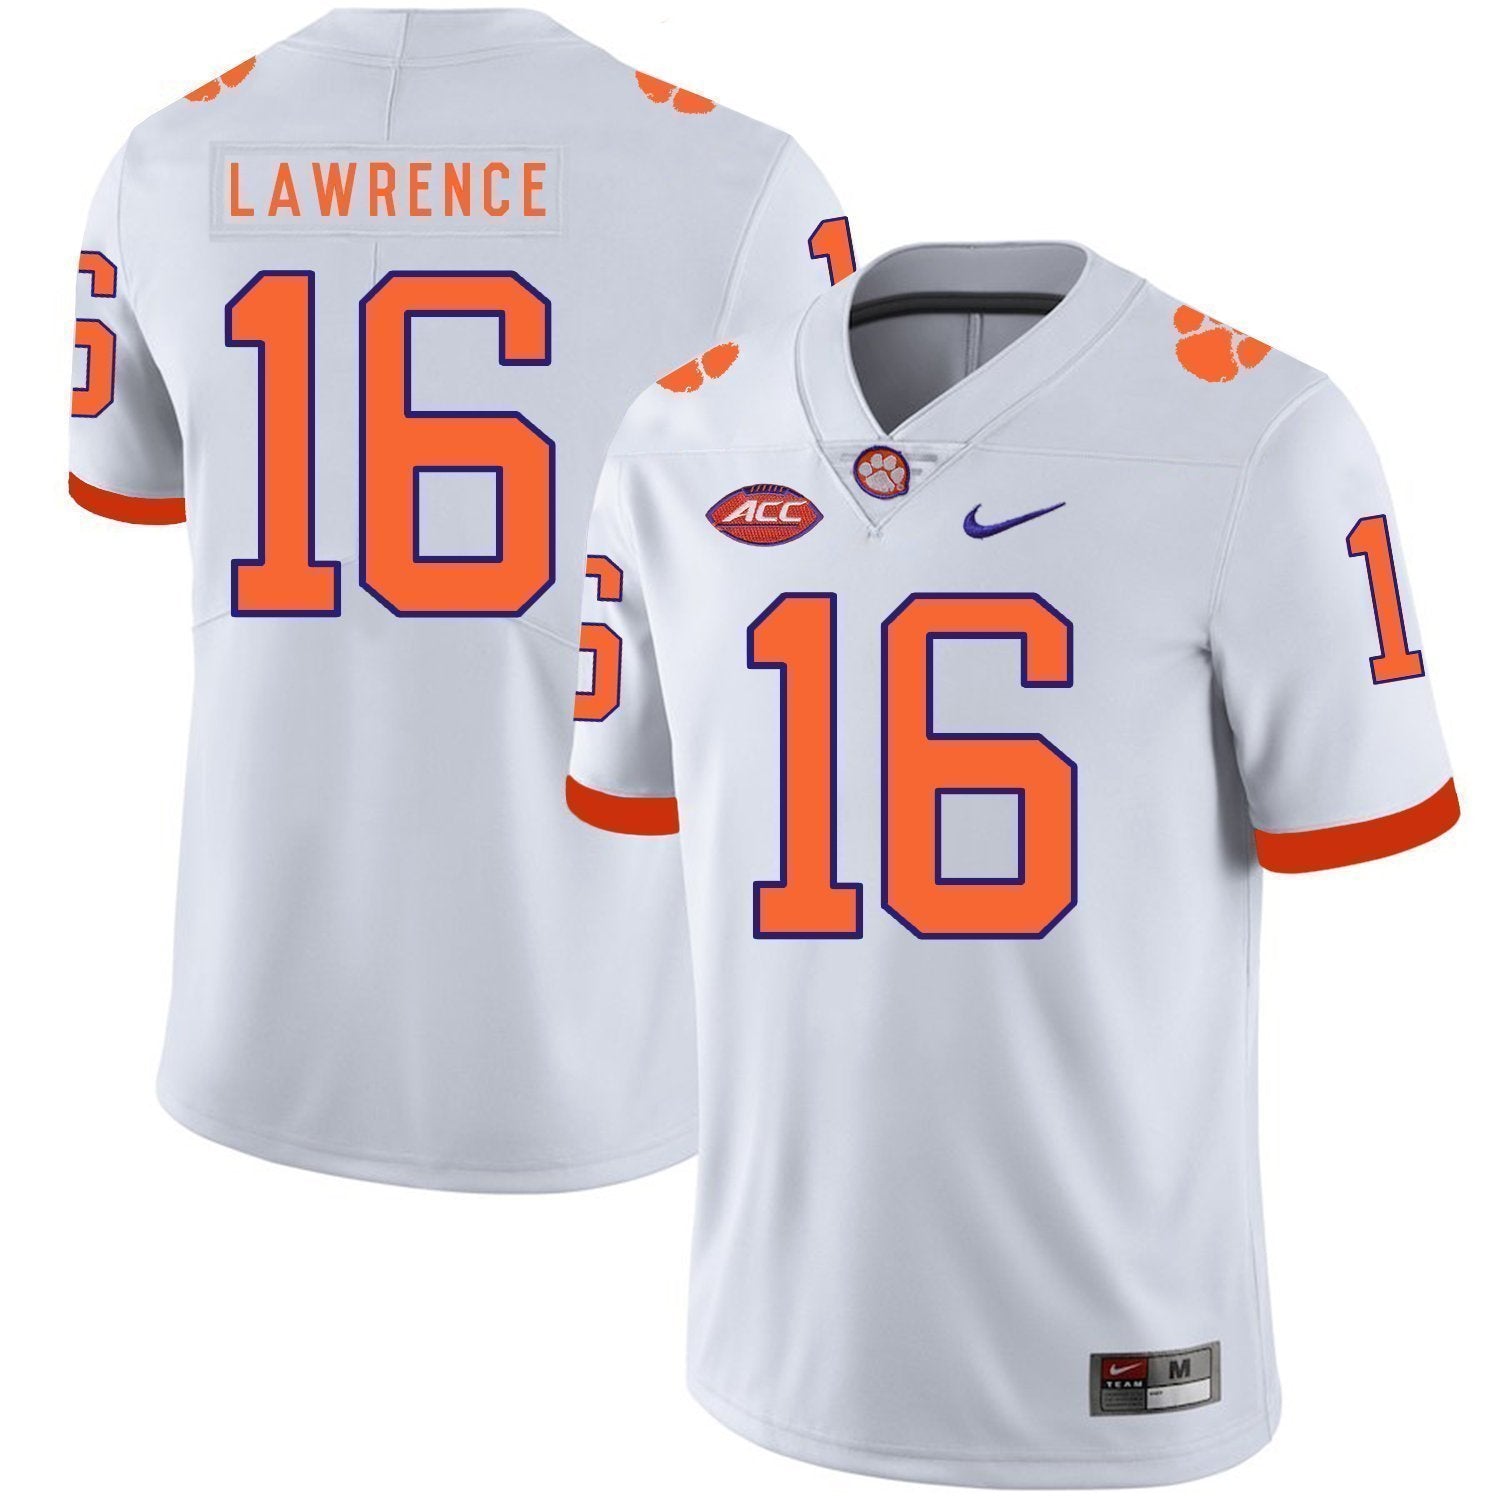 Trevor Lawrence Clemson Tigers Football Jersey White